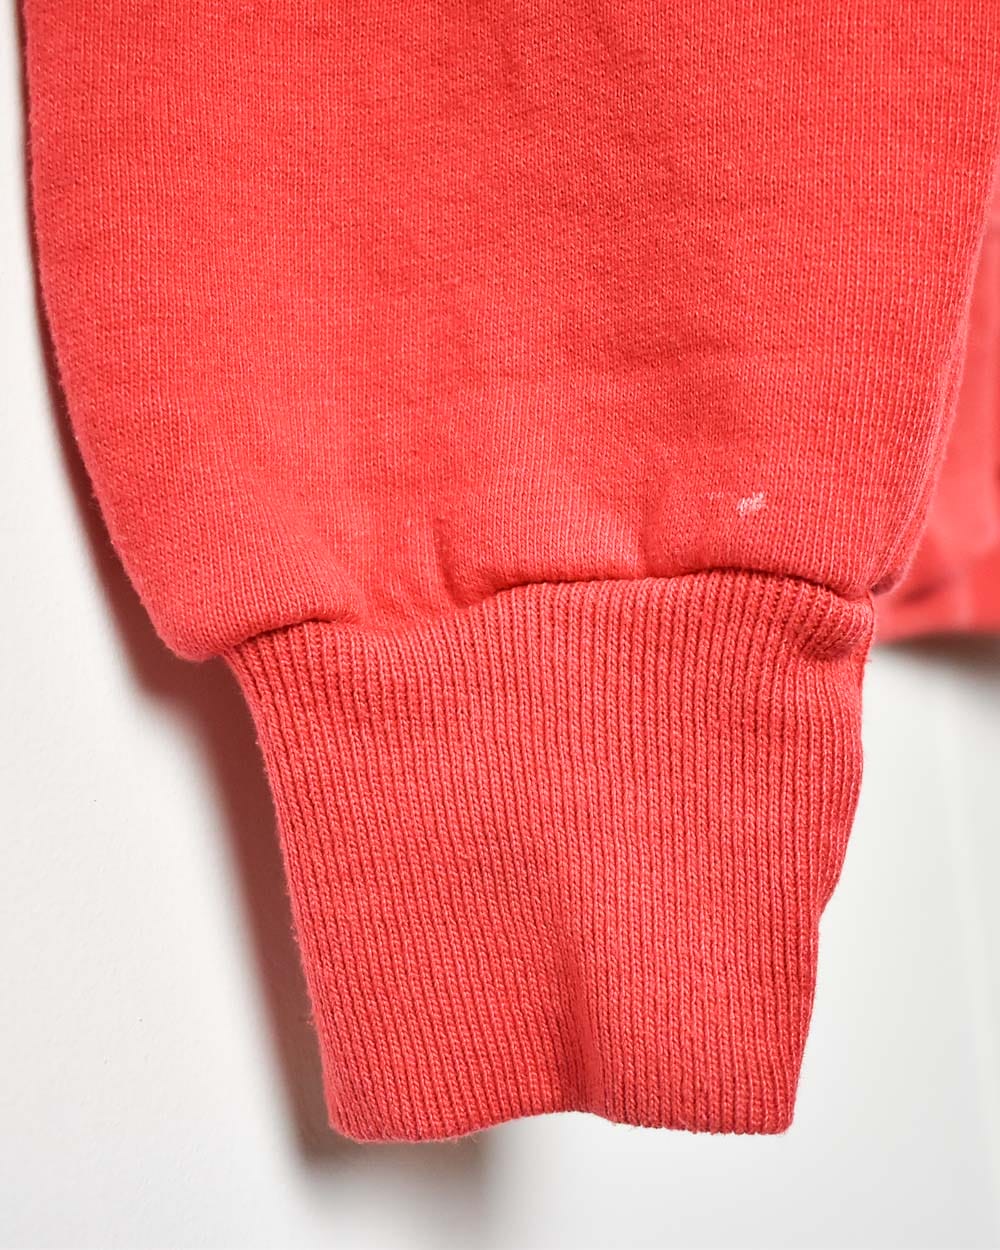 Red Guess Sweatshirt - Small